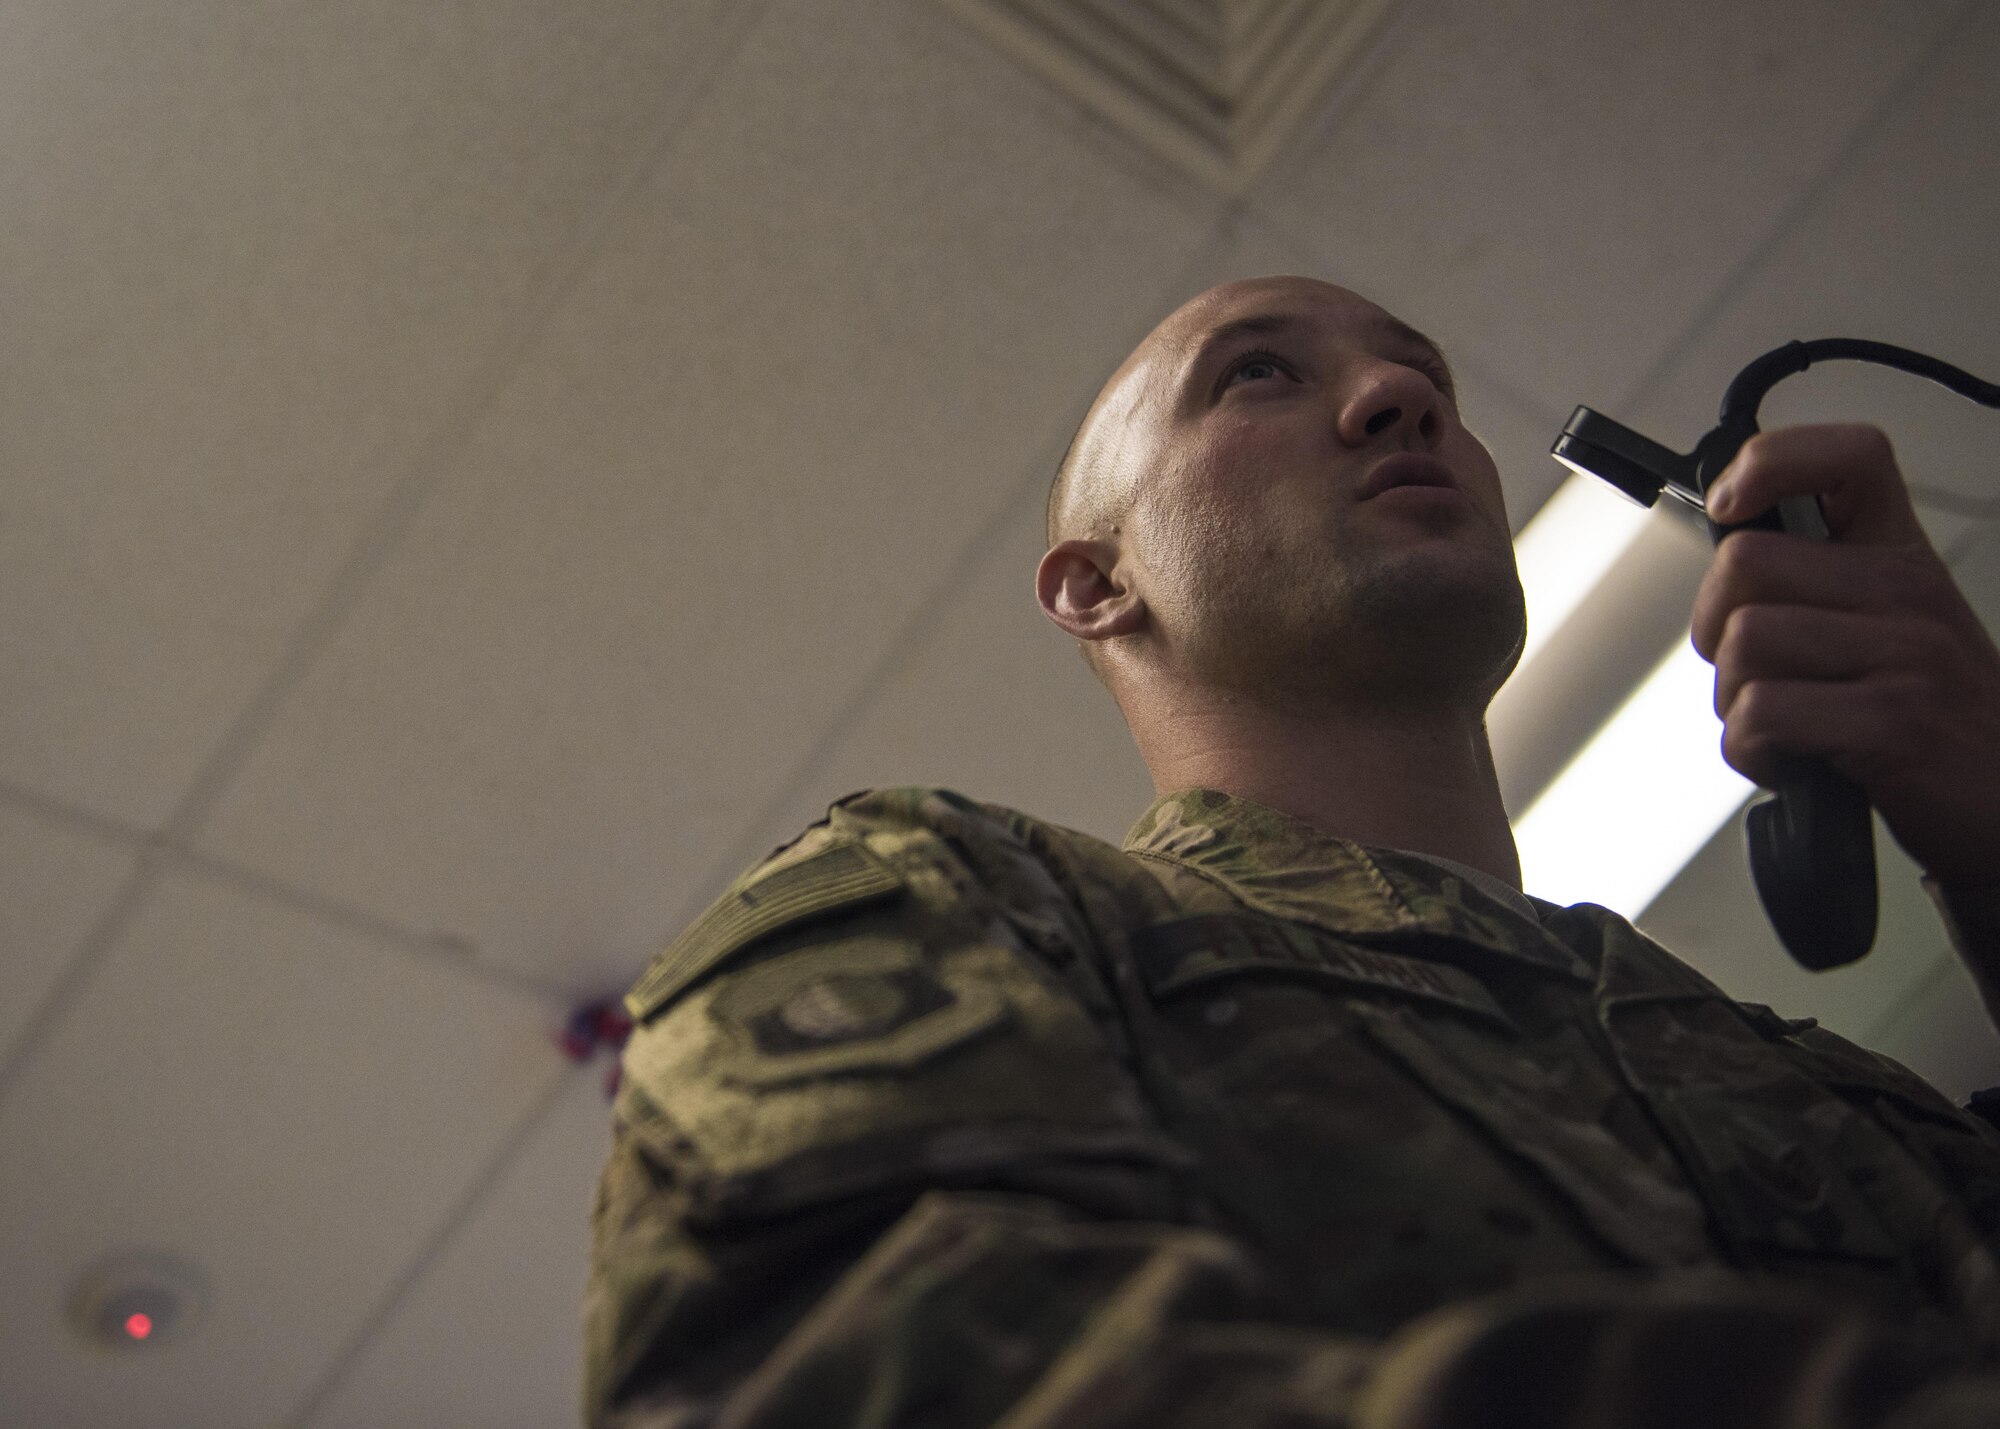 Staff Sgt. Scott Felando, 455th Air Expeditionary Wing command post controller, receives aircraft download information, July 11, 2016, Bagram Airfield, Afghanistan. The 455th AEW command post receives all aircraft download information for the purpose of coordinating flightline operations. (U.S. Air Force photo by Senior Airman Justyn M. Freeman)